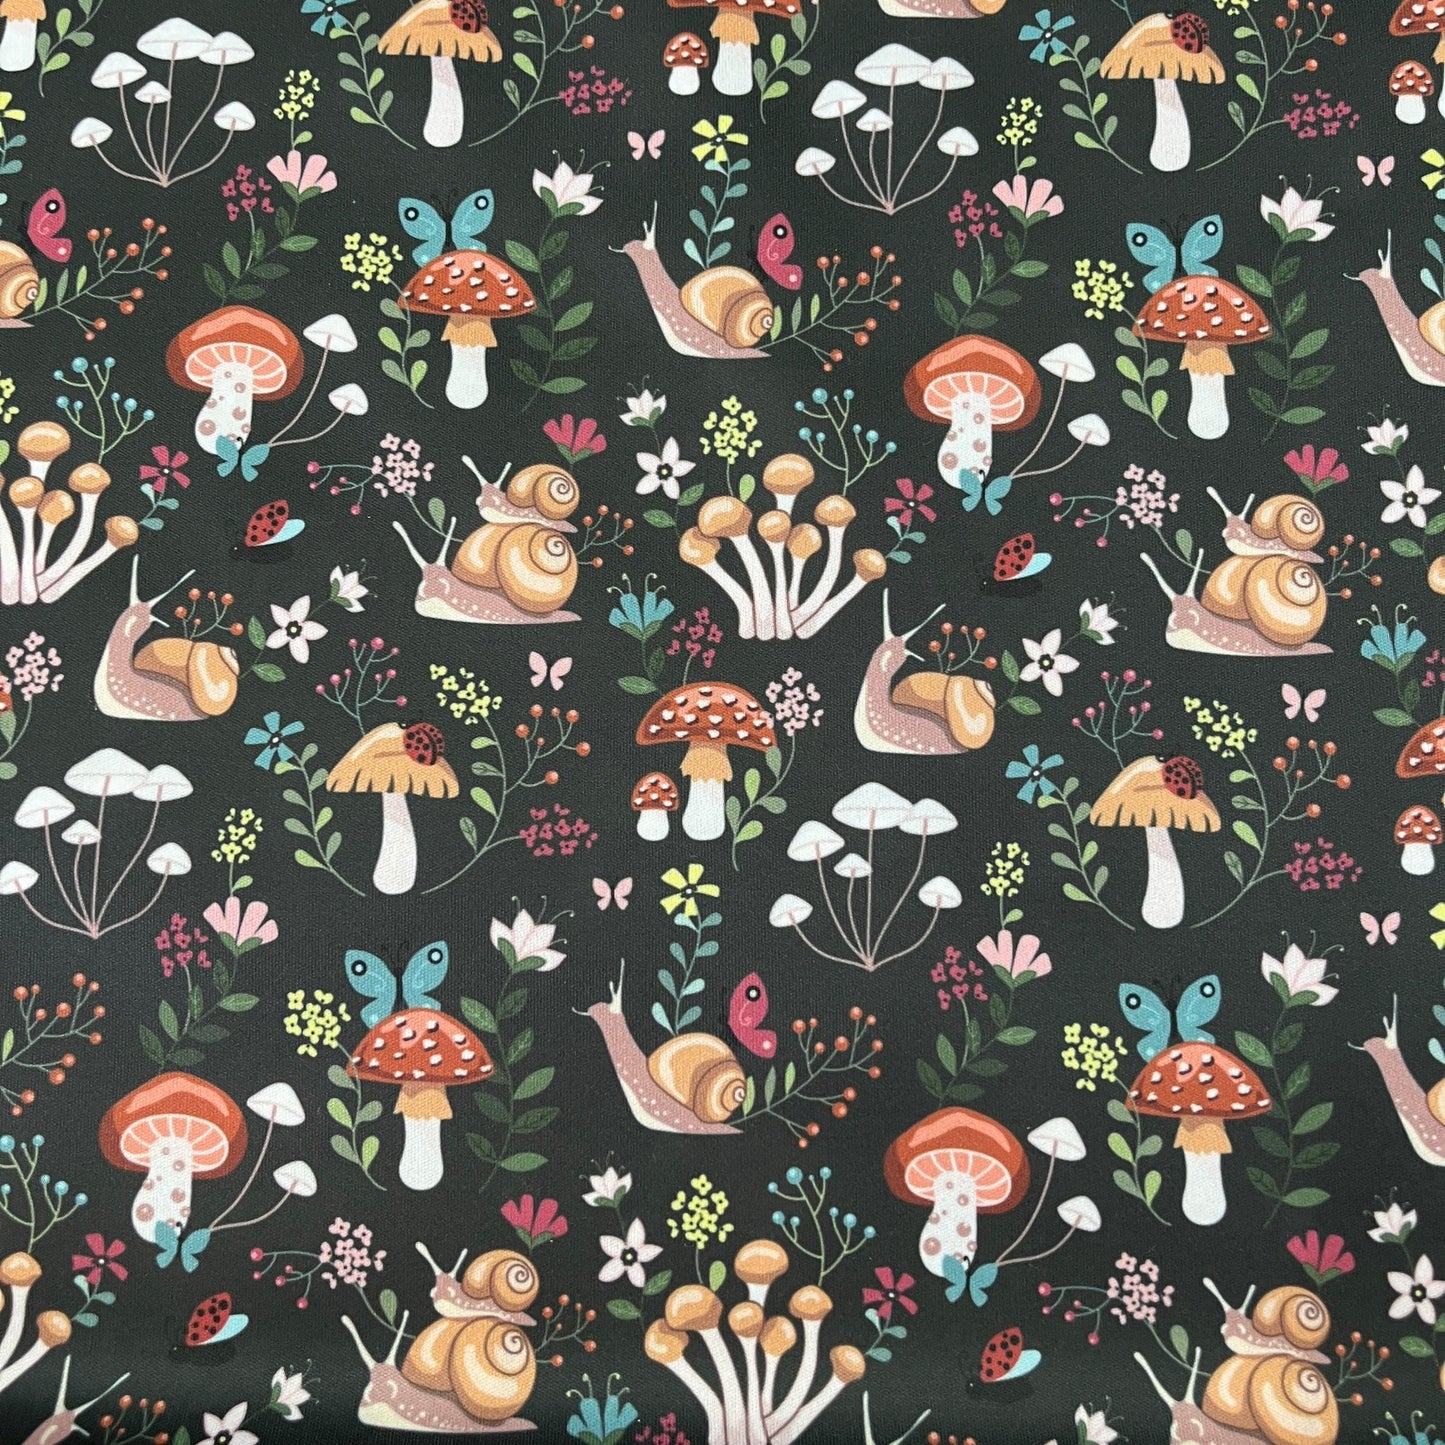 Snails and Mushrooms 1 mil PUL Fabric - Made in the USA - Nature's Fabrics